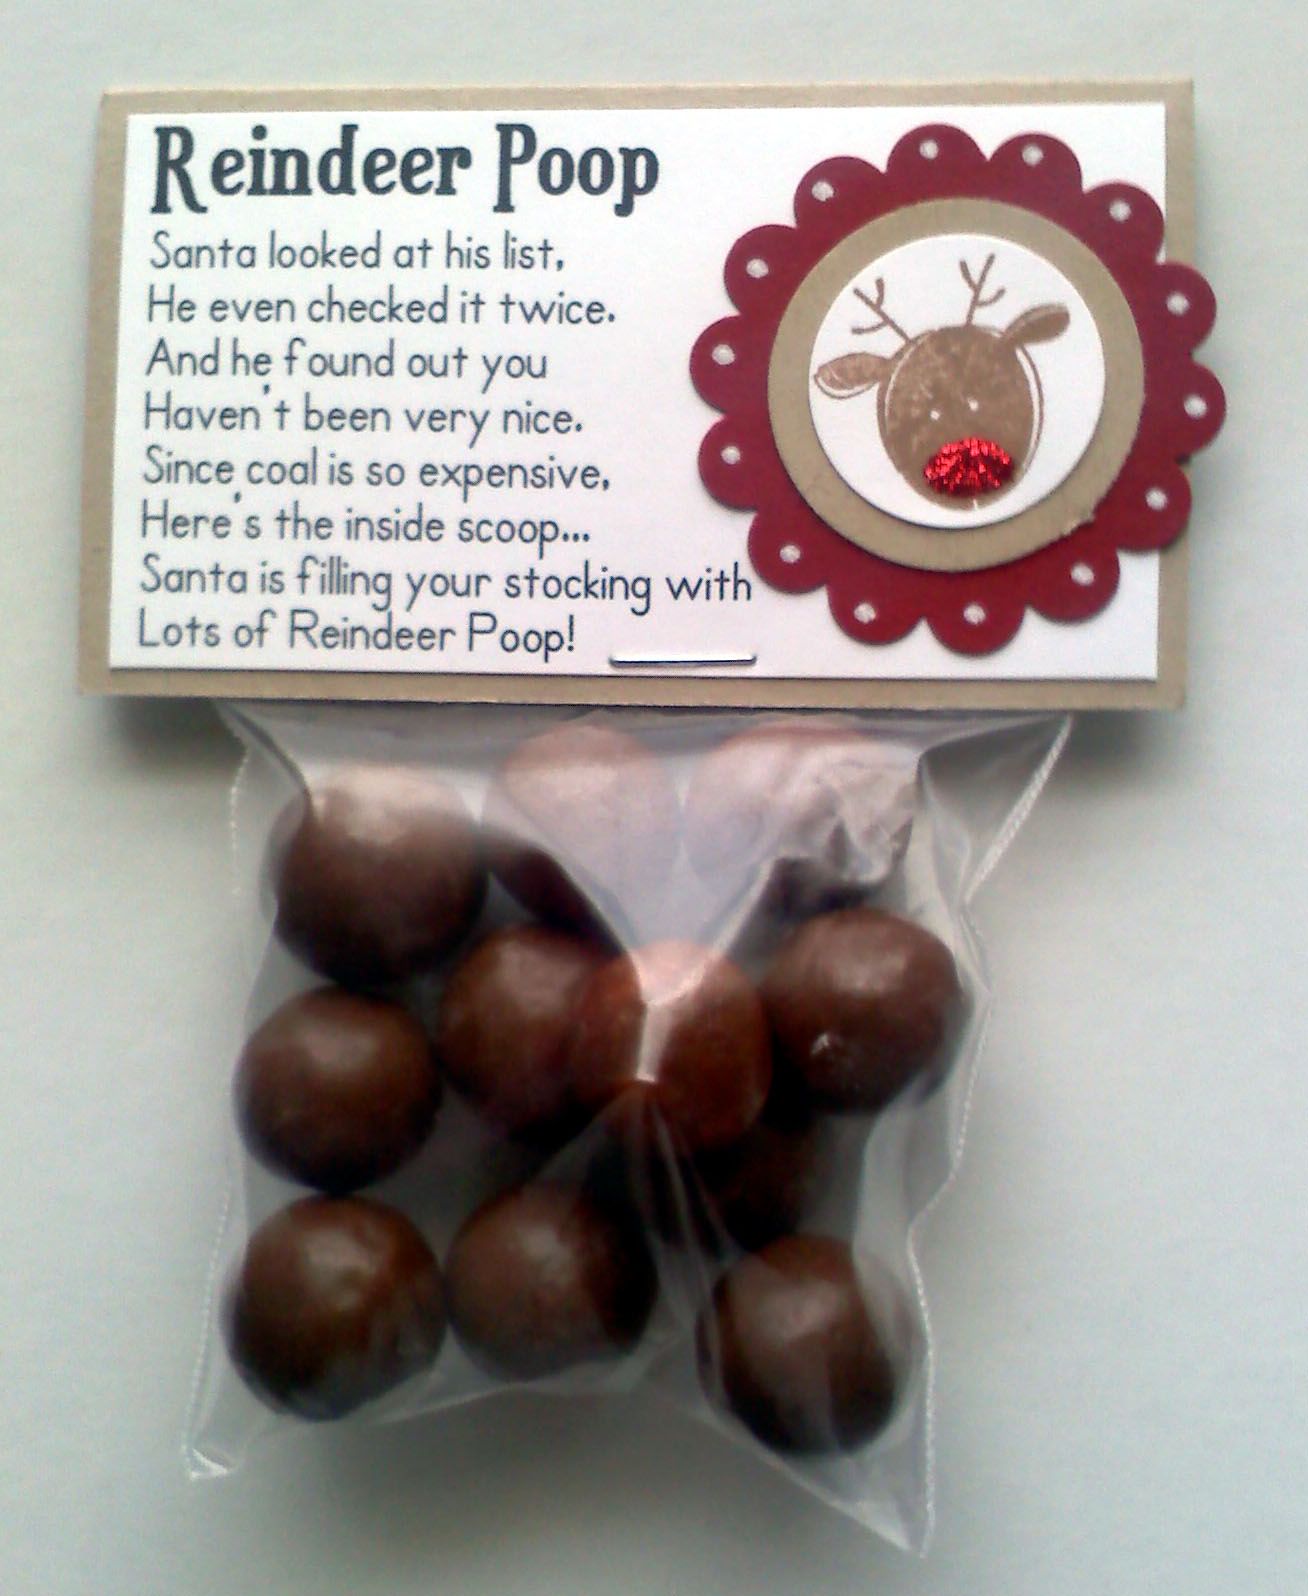 Reindeer Poop Poem
Santa looked at his list, he even checked it twice. and he f